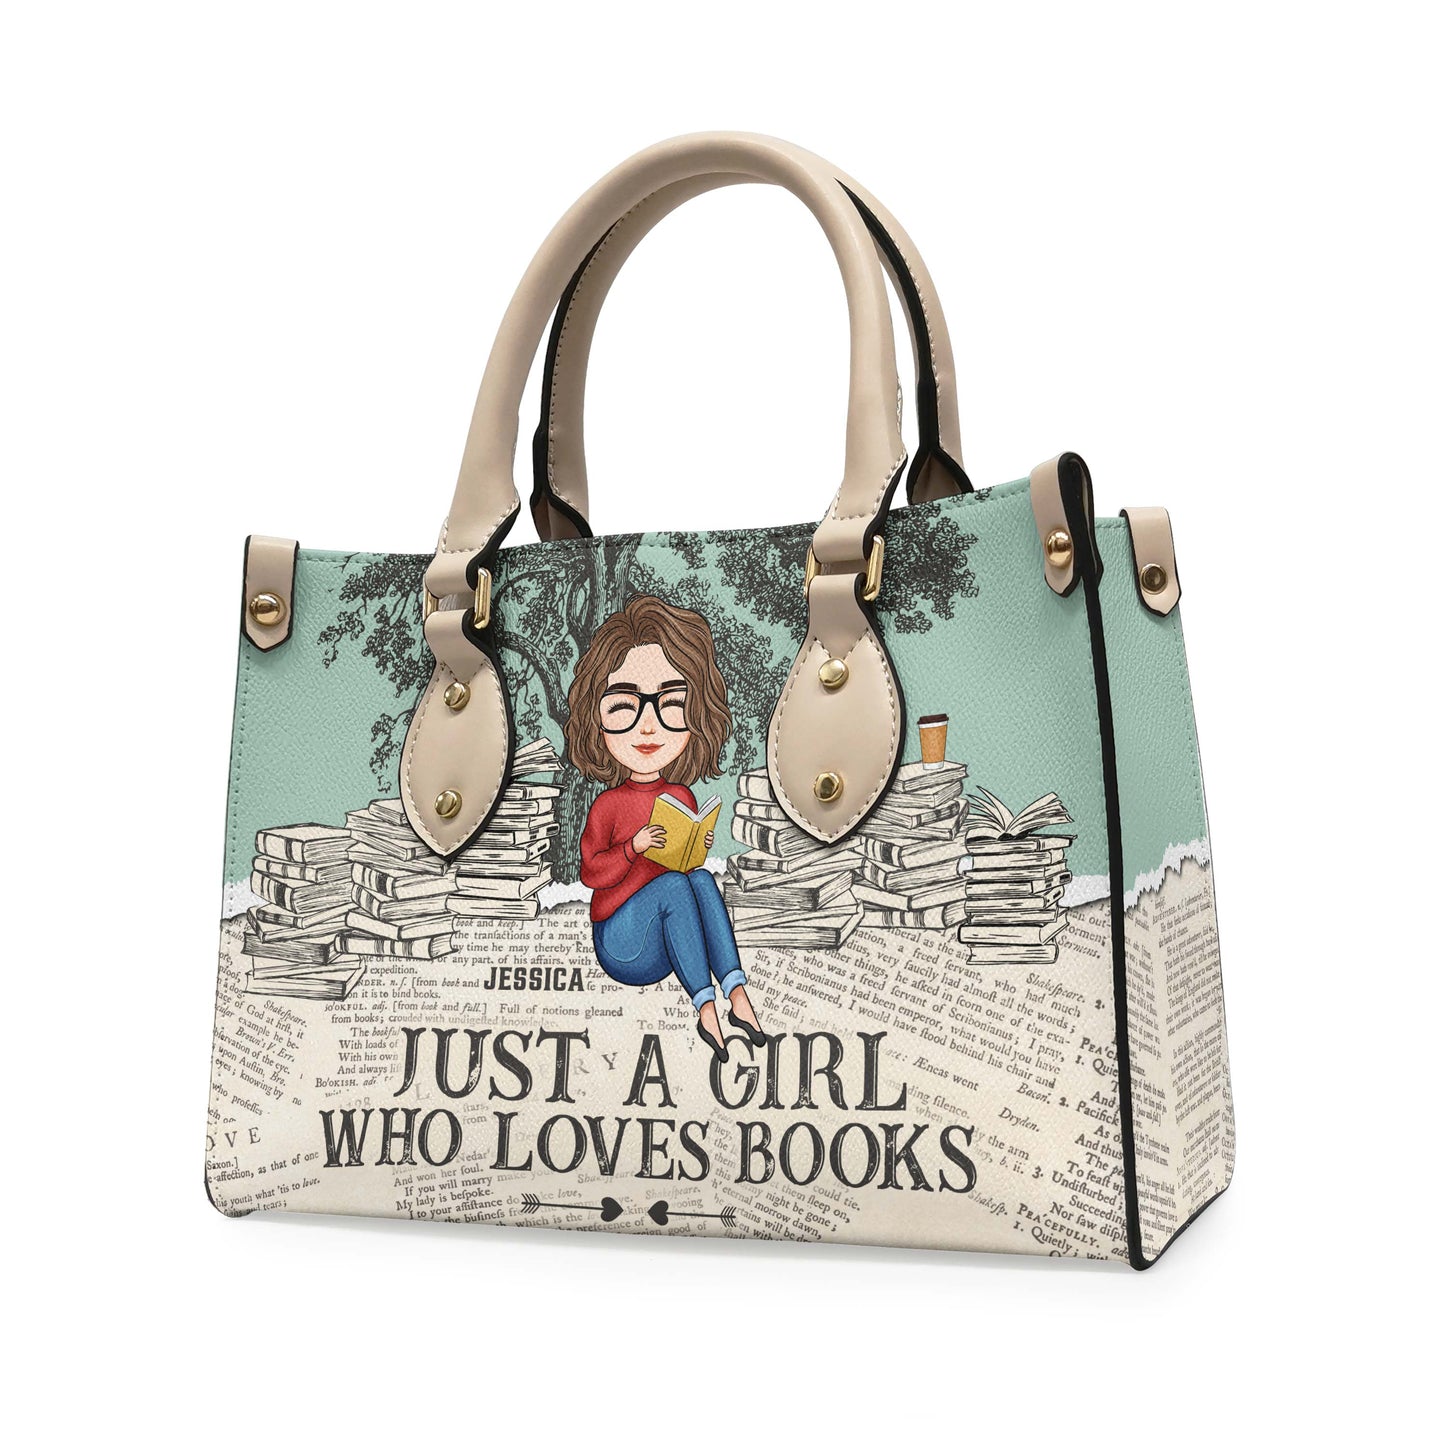 Just A Girl Who Loves Books - Personalized Leather Bag - Birthday, Loving Gift For Her, Book Nerds, Book Lovers, People Love Reading